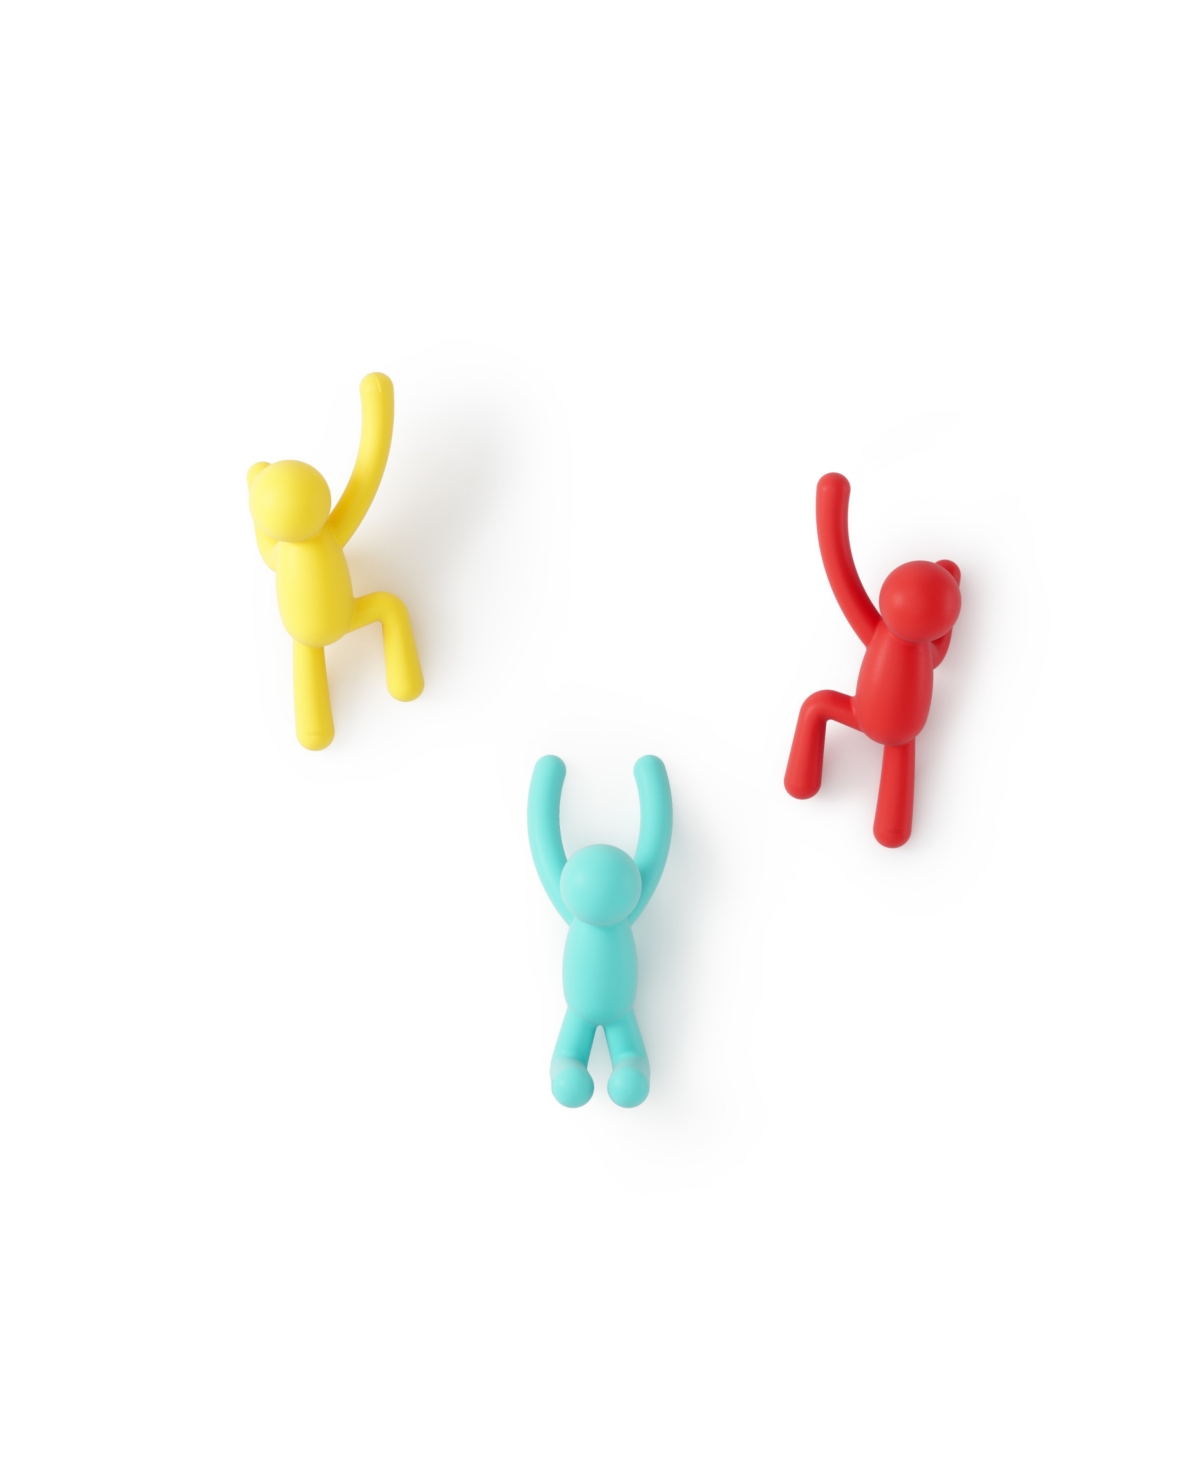 Buddy Wall Hooks, Set of 3 - Assorted Color